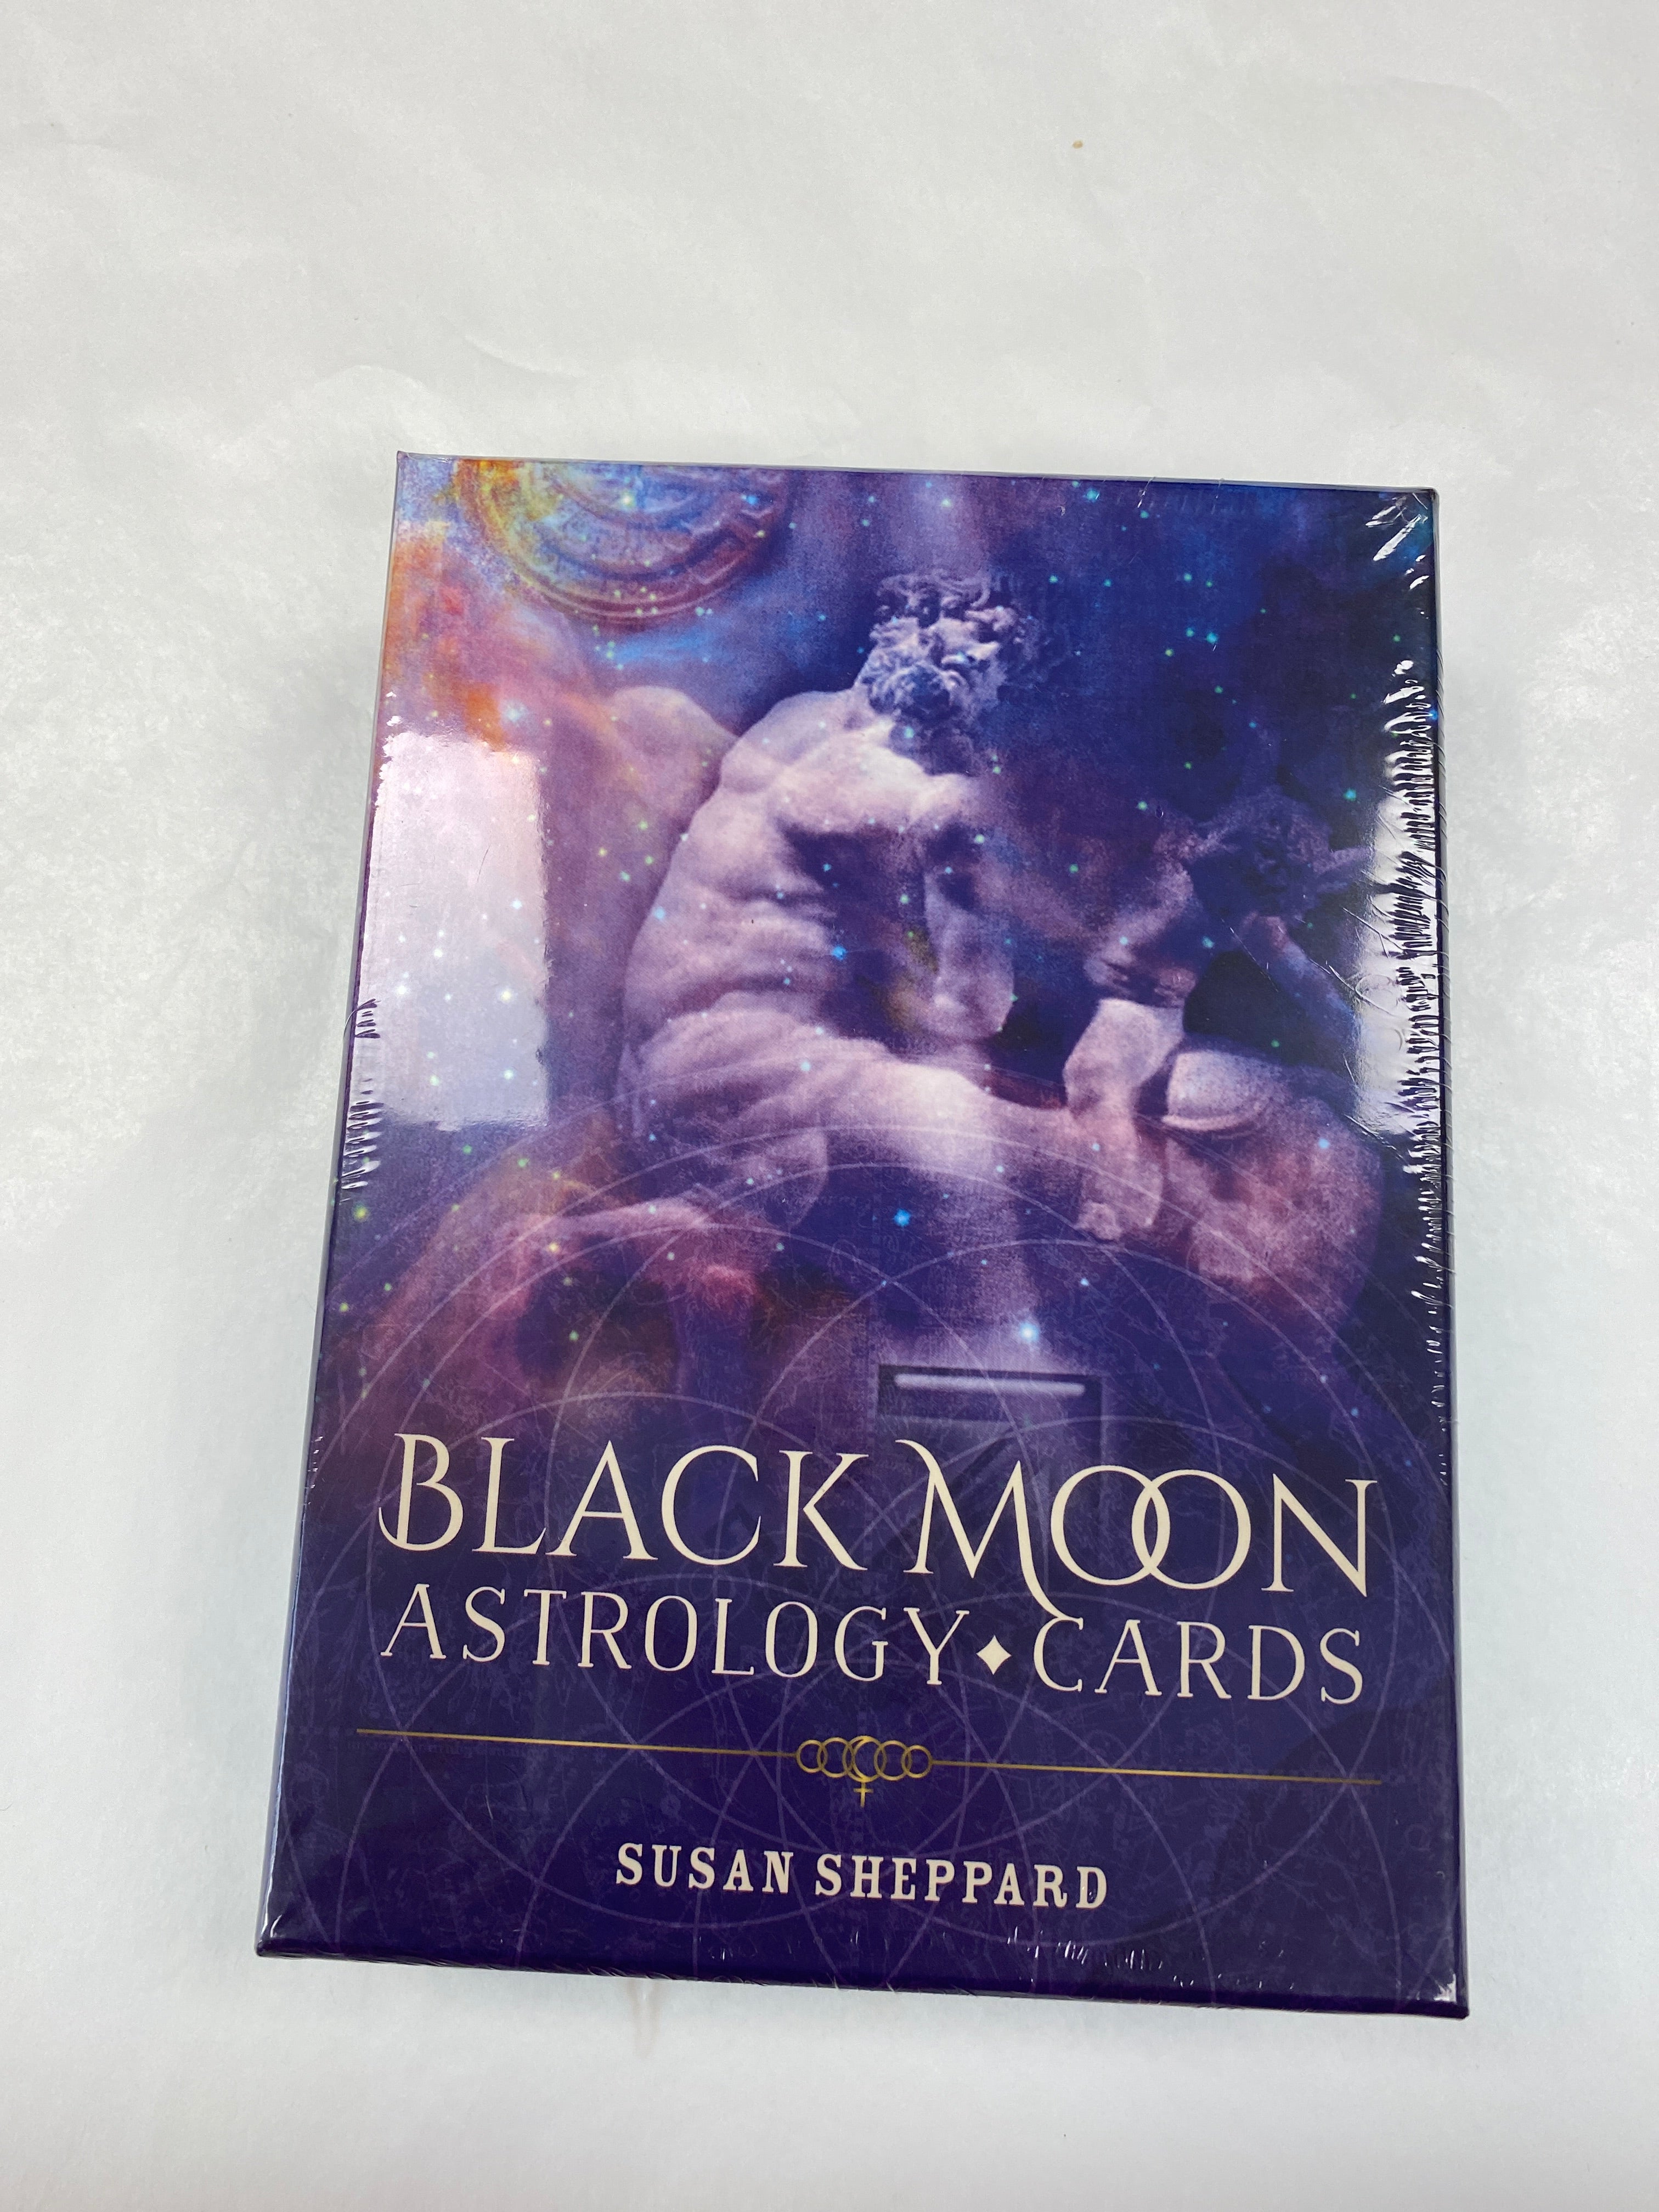 Black Moon Astrology Oracle Cards